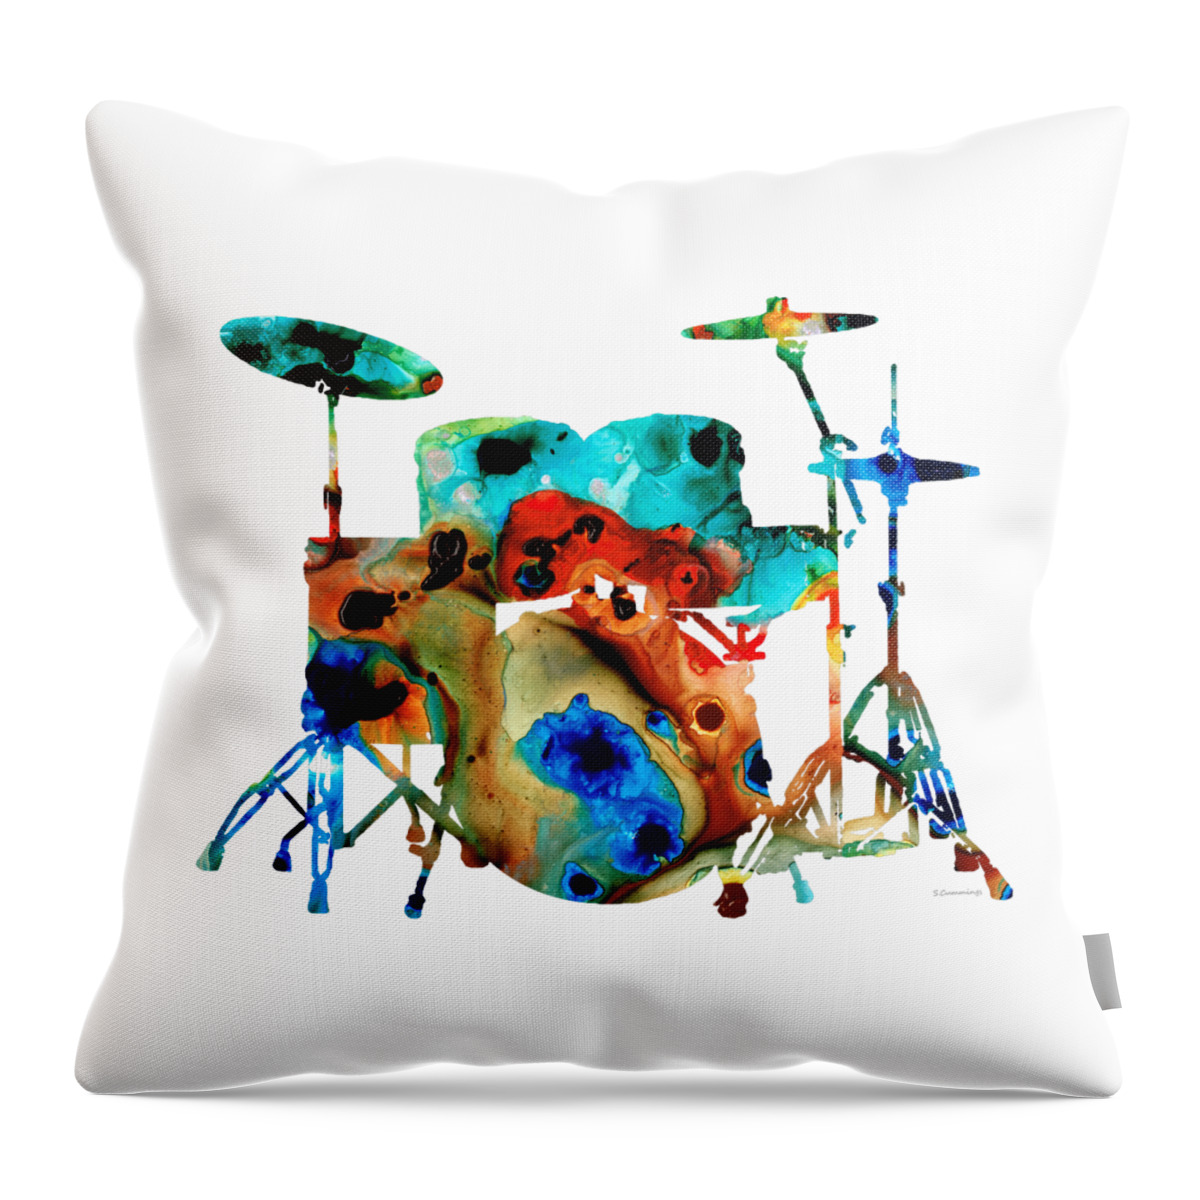 Drum Throw Pillow featuring the painting The Drums - Music Art By Sharon Cummings by Sharon Cummings